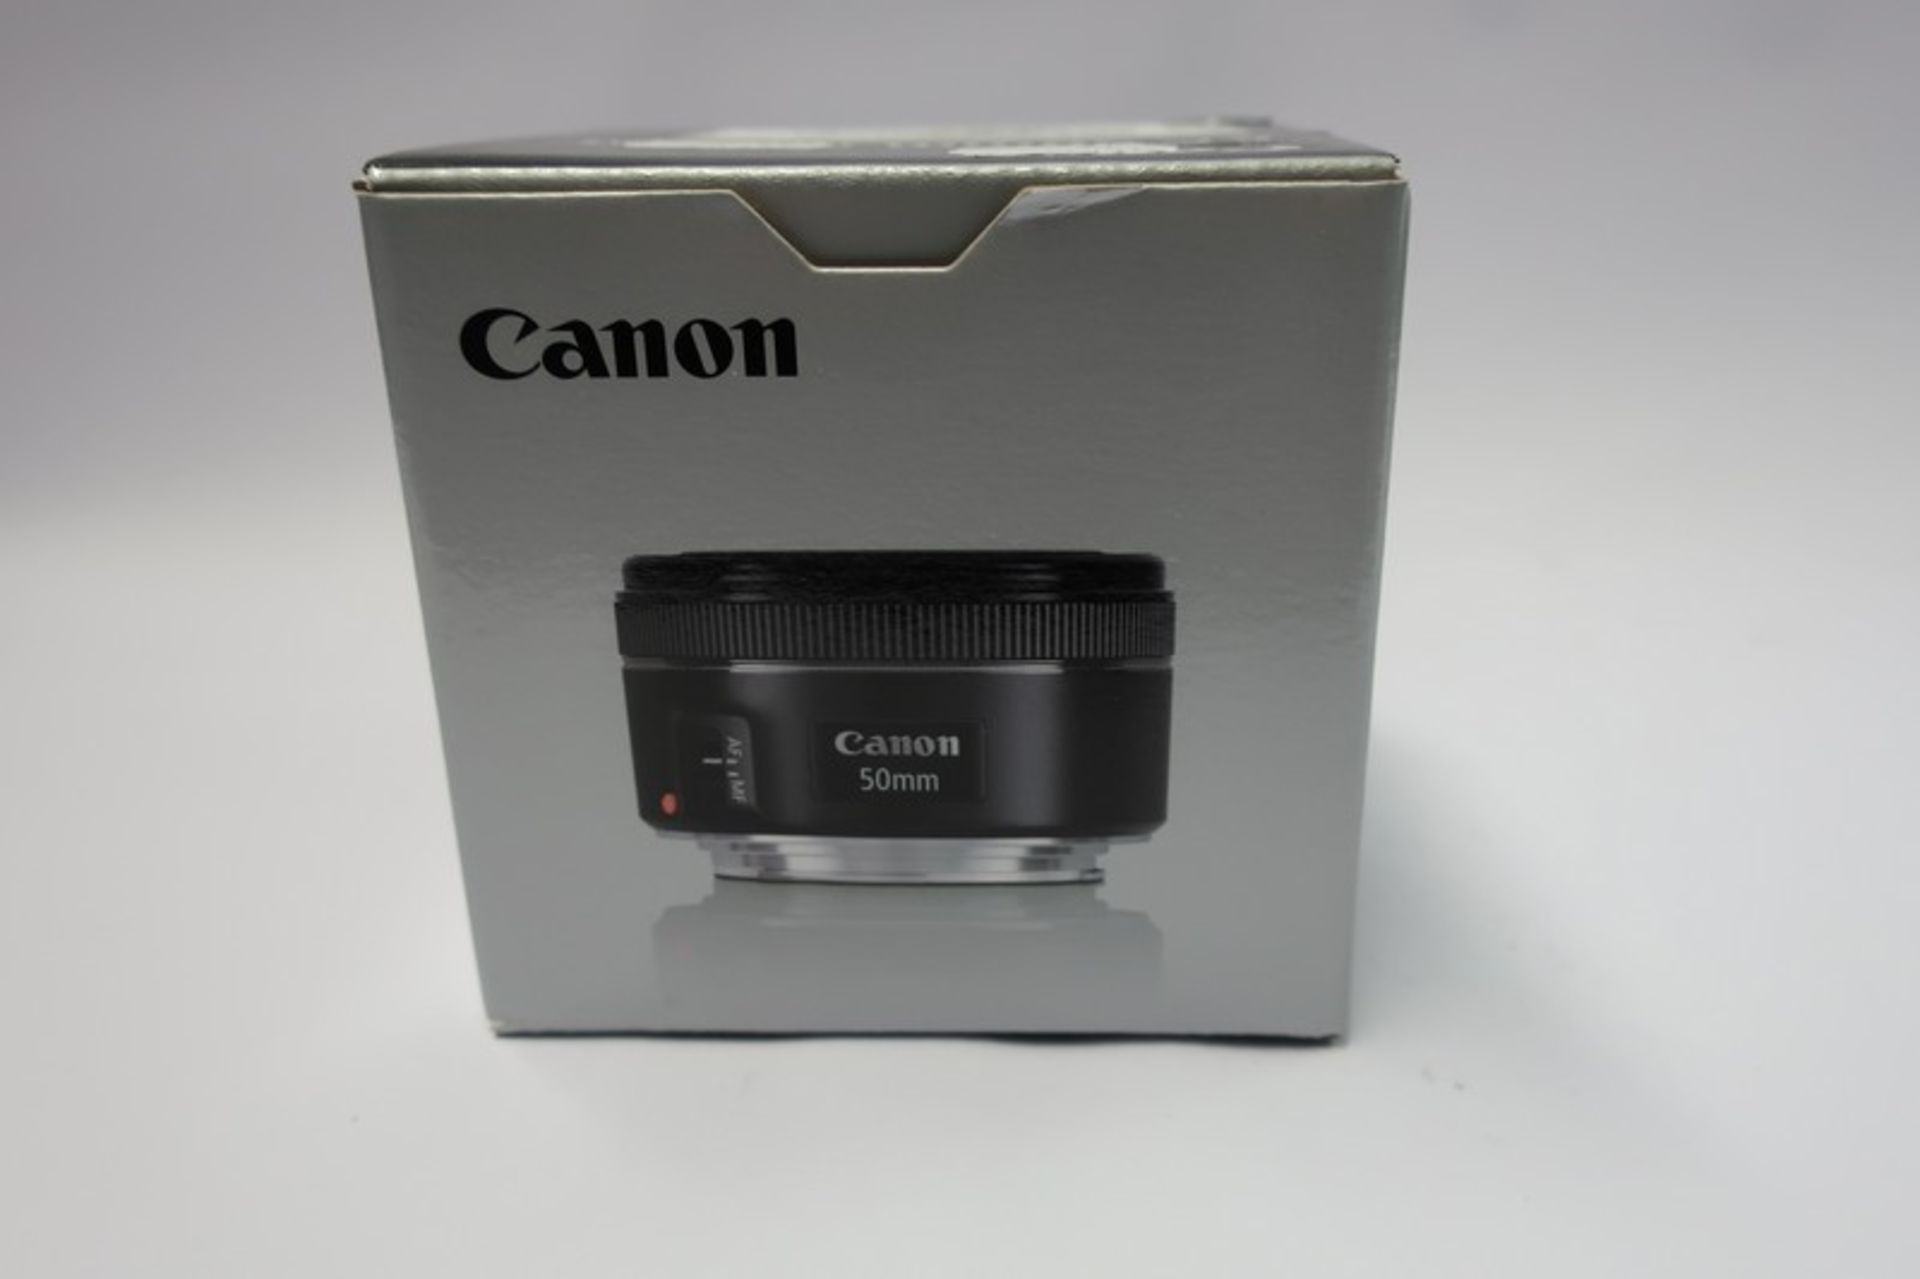 A boxed as new Canon EF 50mm f/1.8 STM lens.